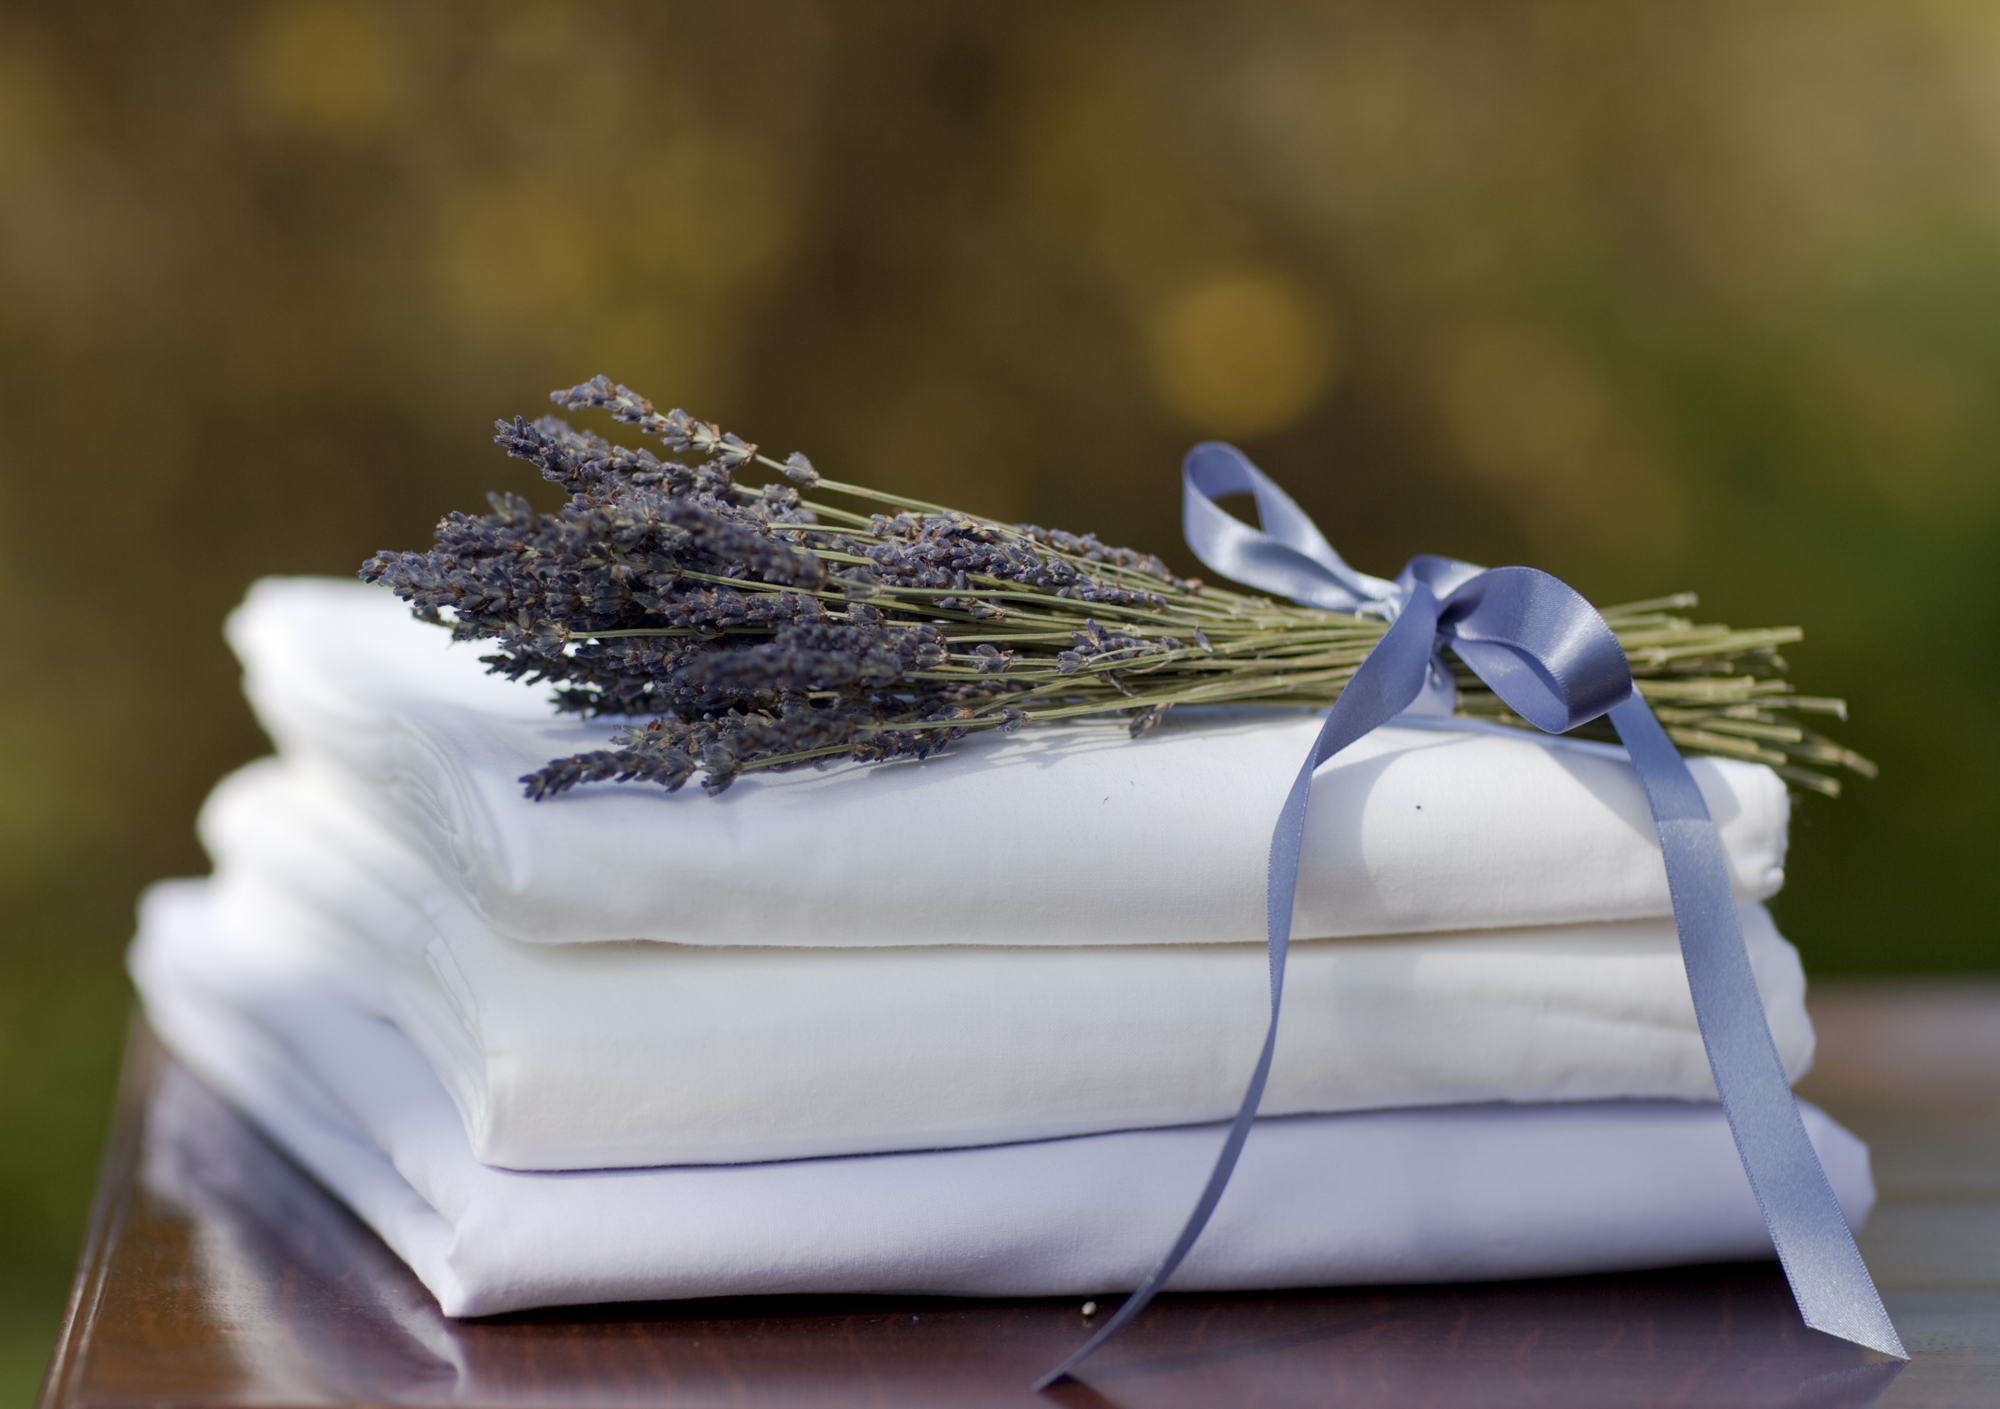 Freshly ironed sheets with a sprig of lavender